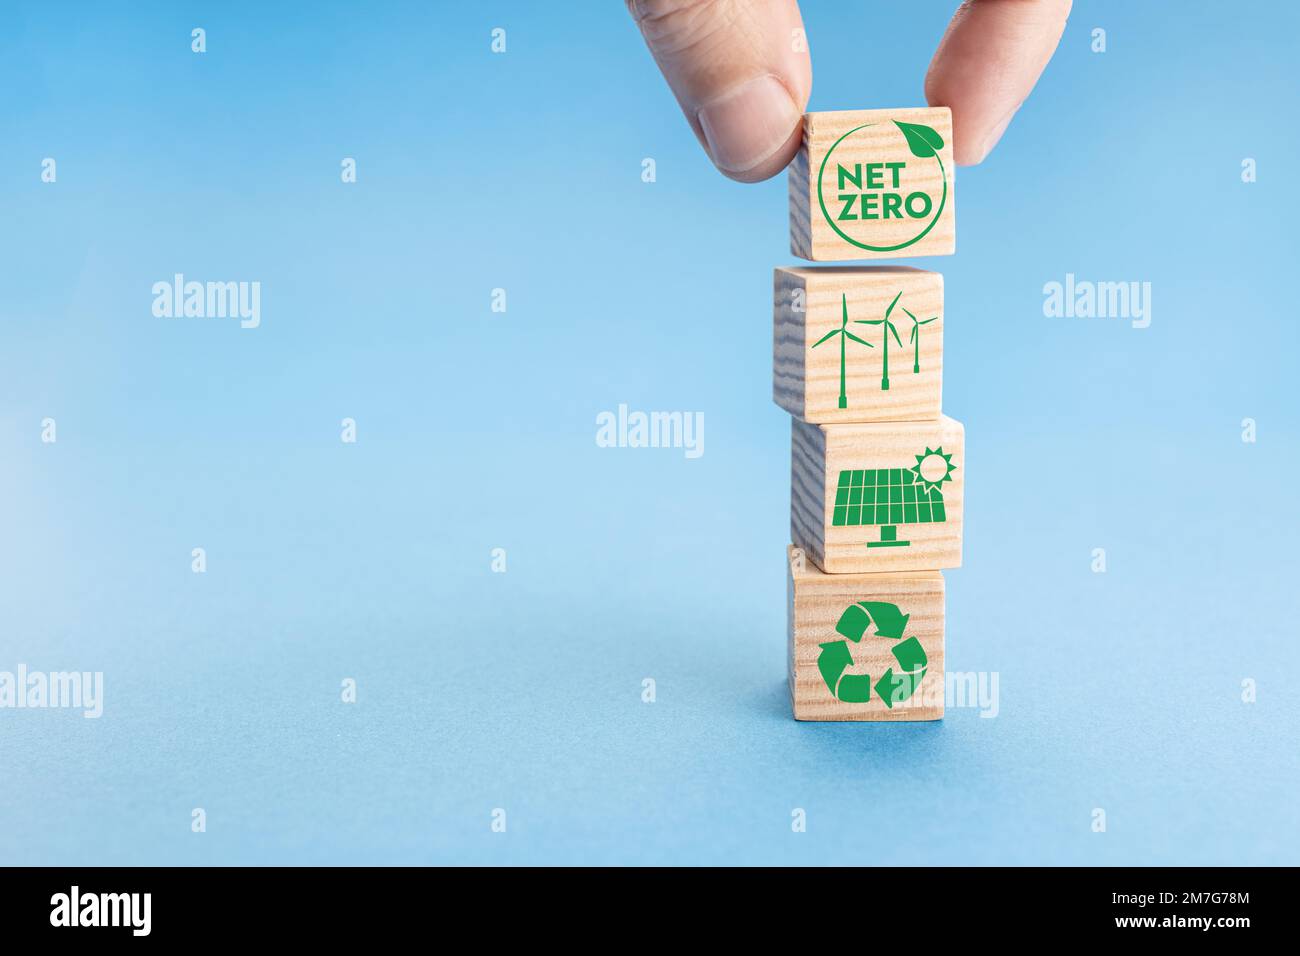 Net Zero and Carbon Neutral Concept. Hand putting wood block with Net Zero icon on top of others with green energy icons. Blue background. Copy space Stock Photo